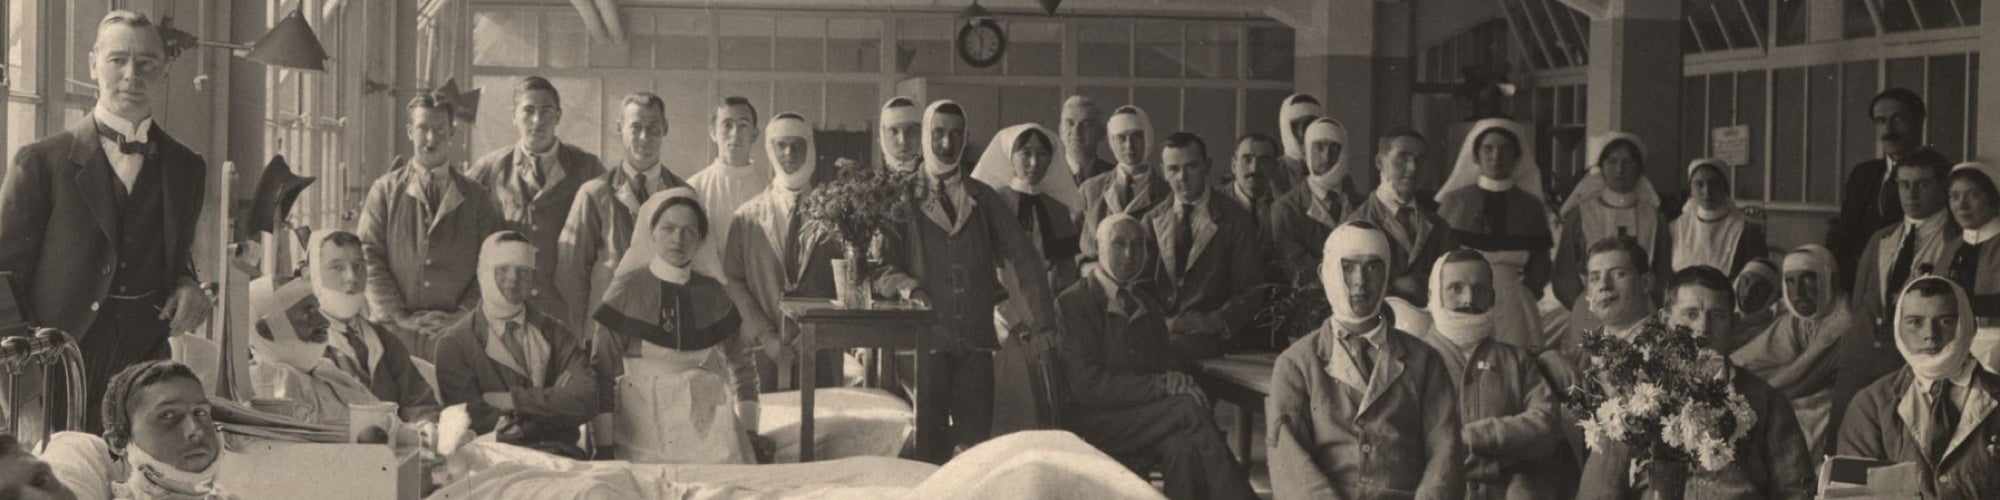 Historic Photo of Medical Professionals on the Western Front